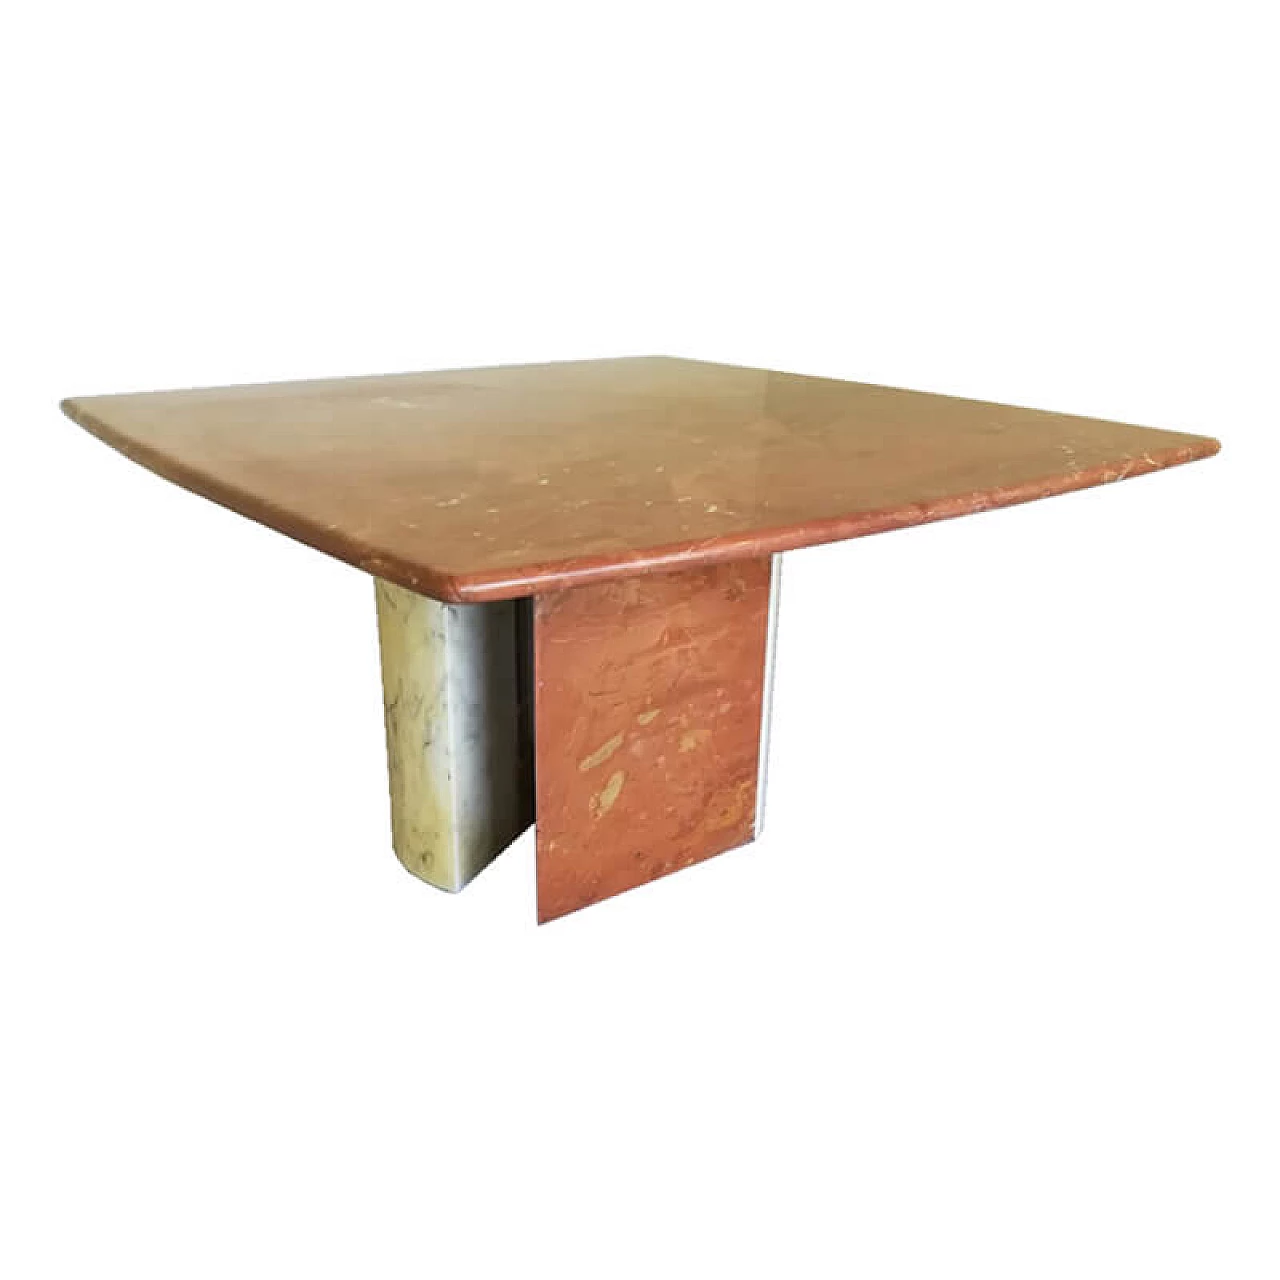 Square two-coloured marble table 1075272